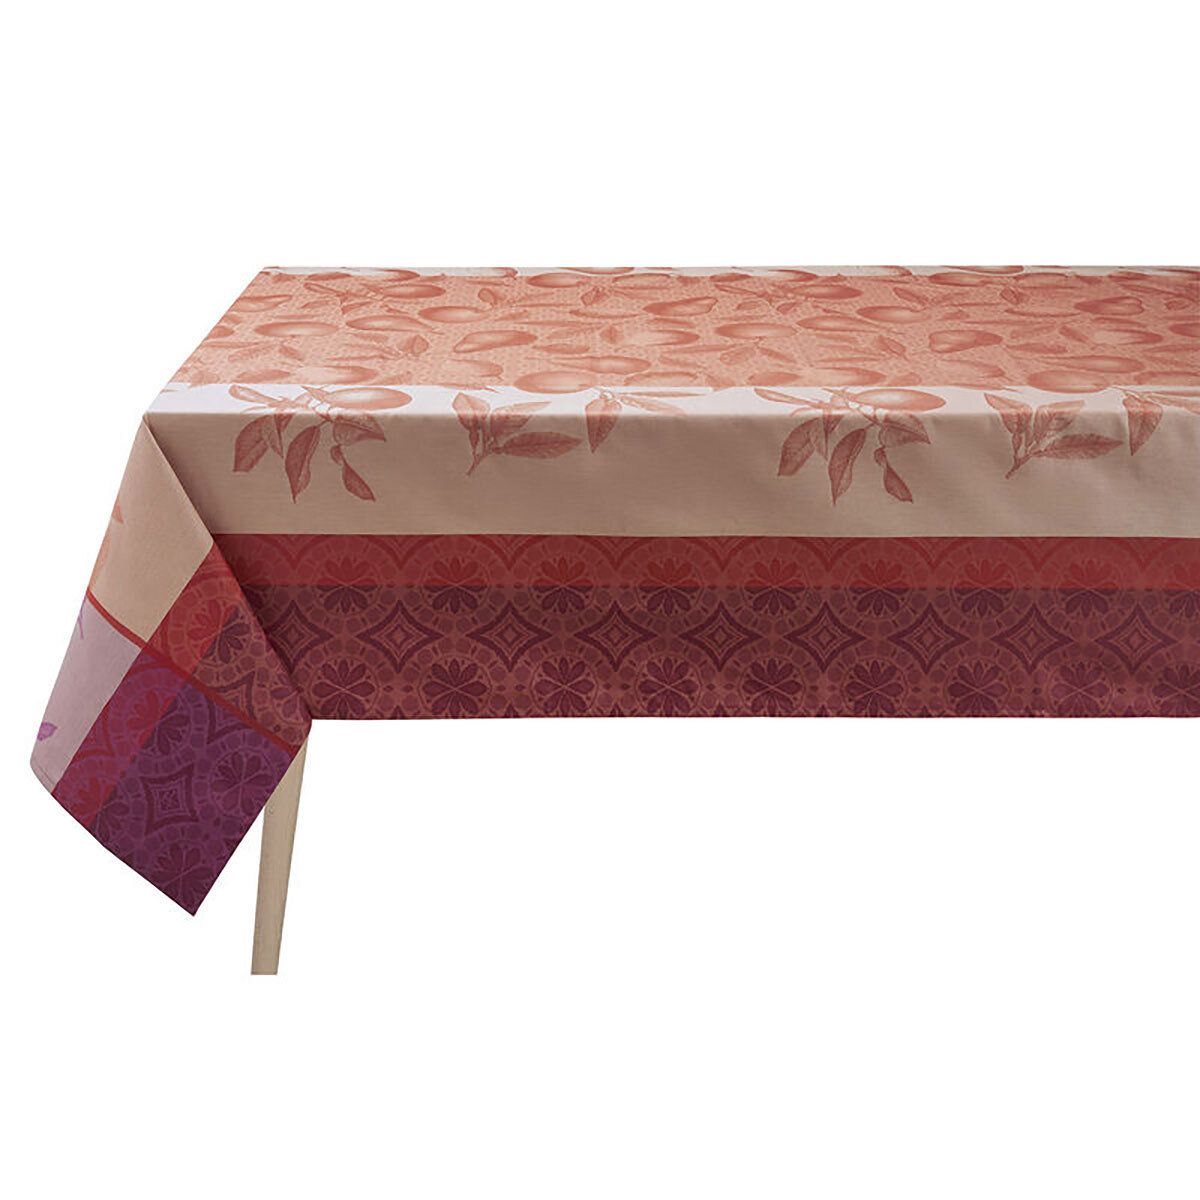 Le Jacquard Francais Arriere-Pays Pink Coated Tablecloth 69 x 126 Inch 27412